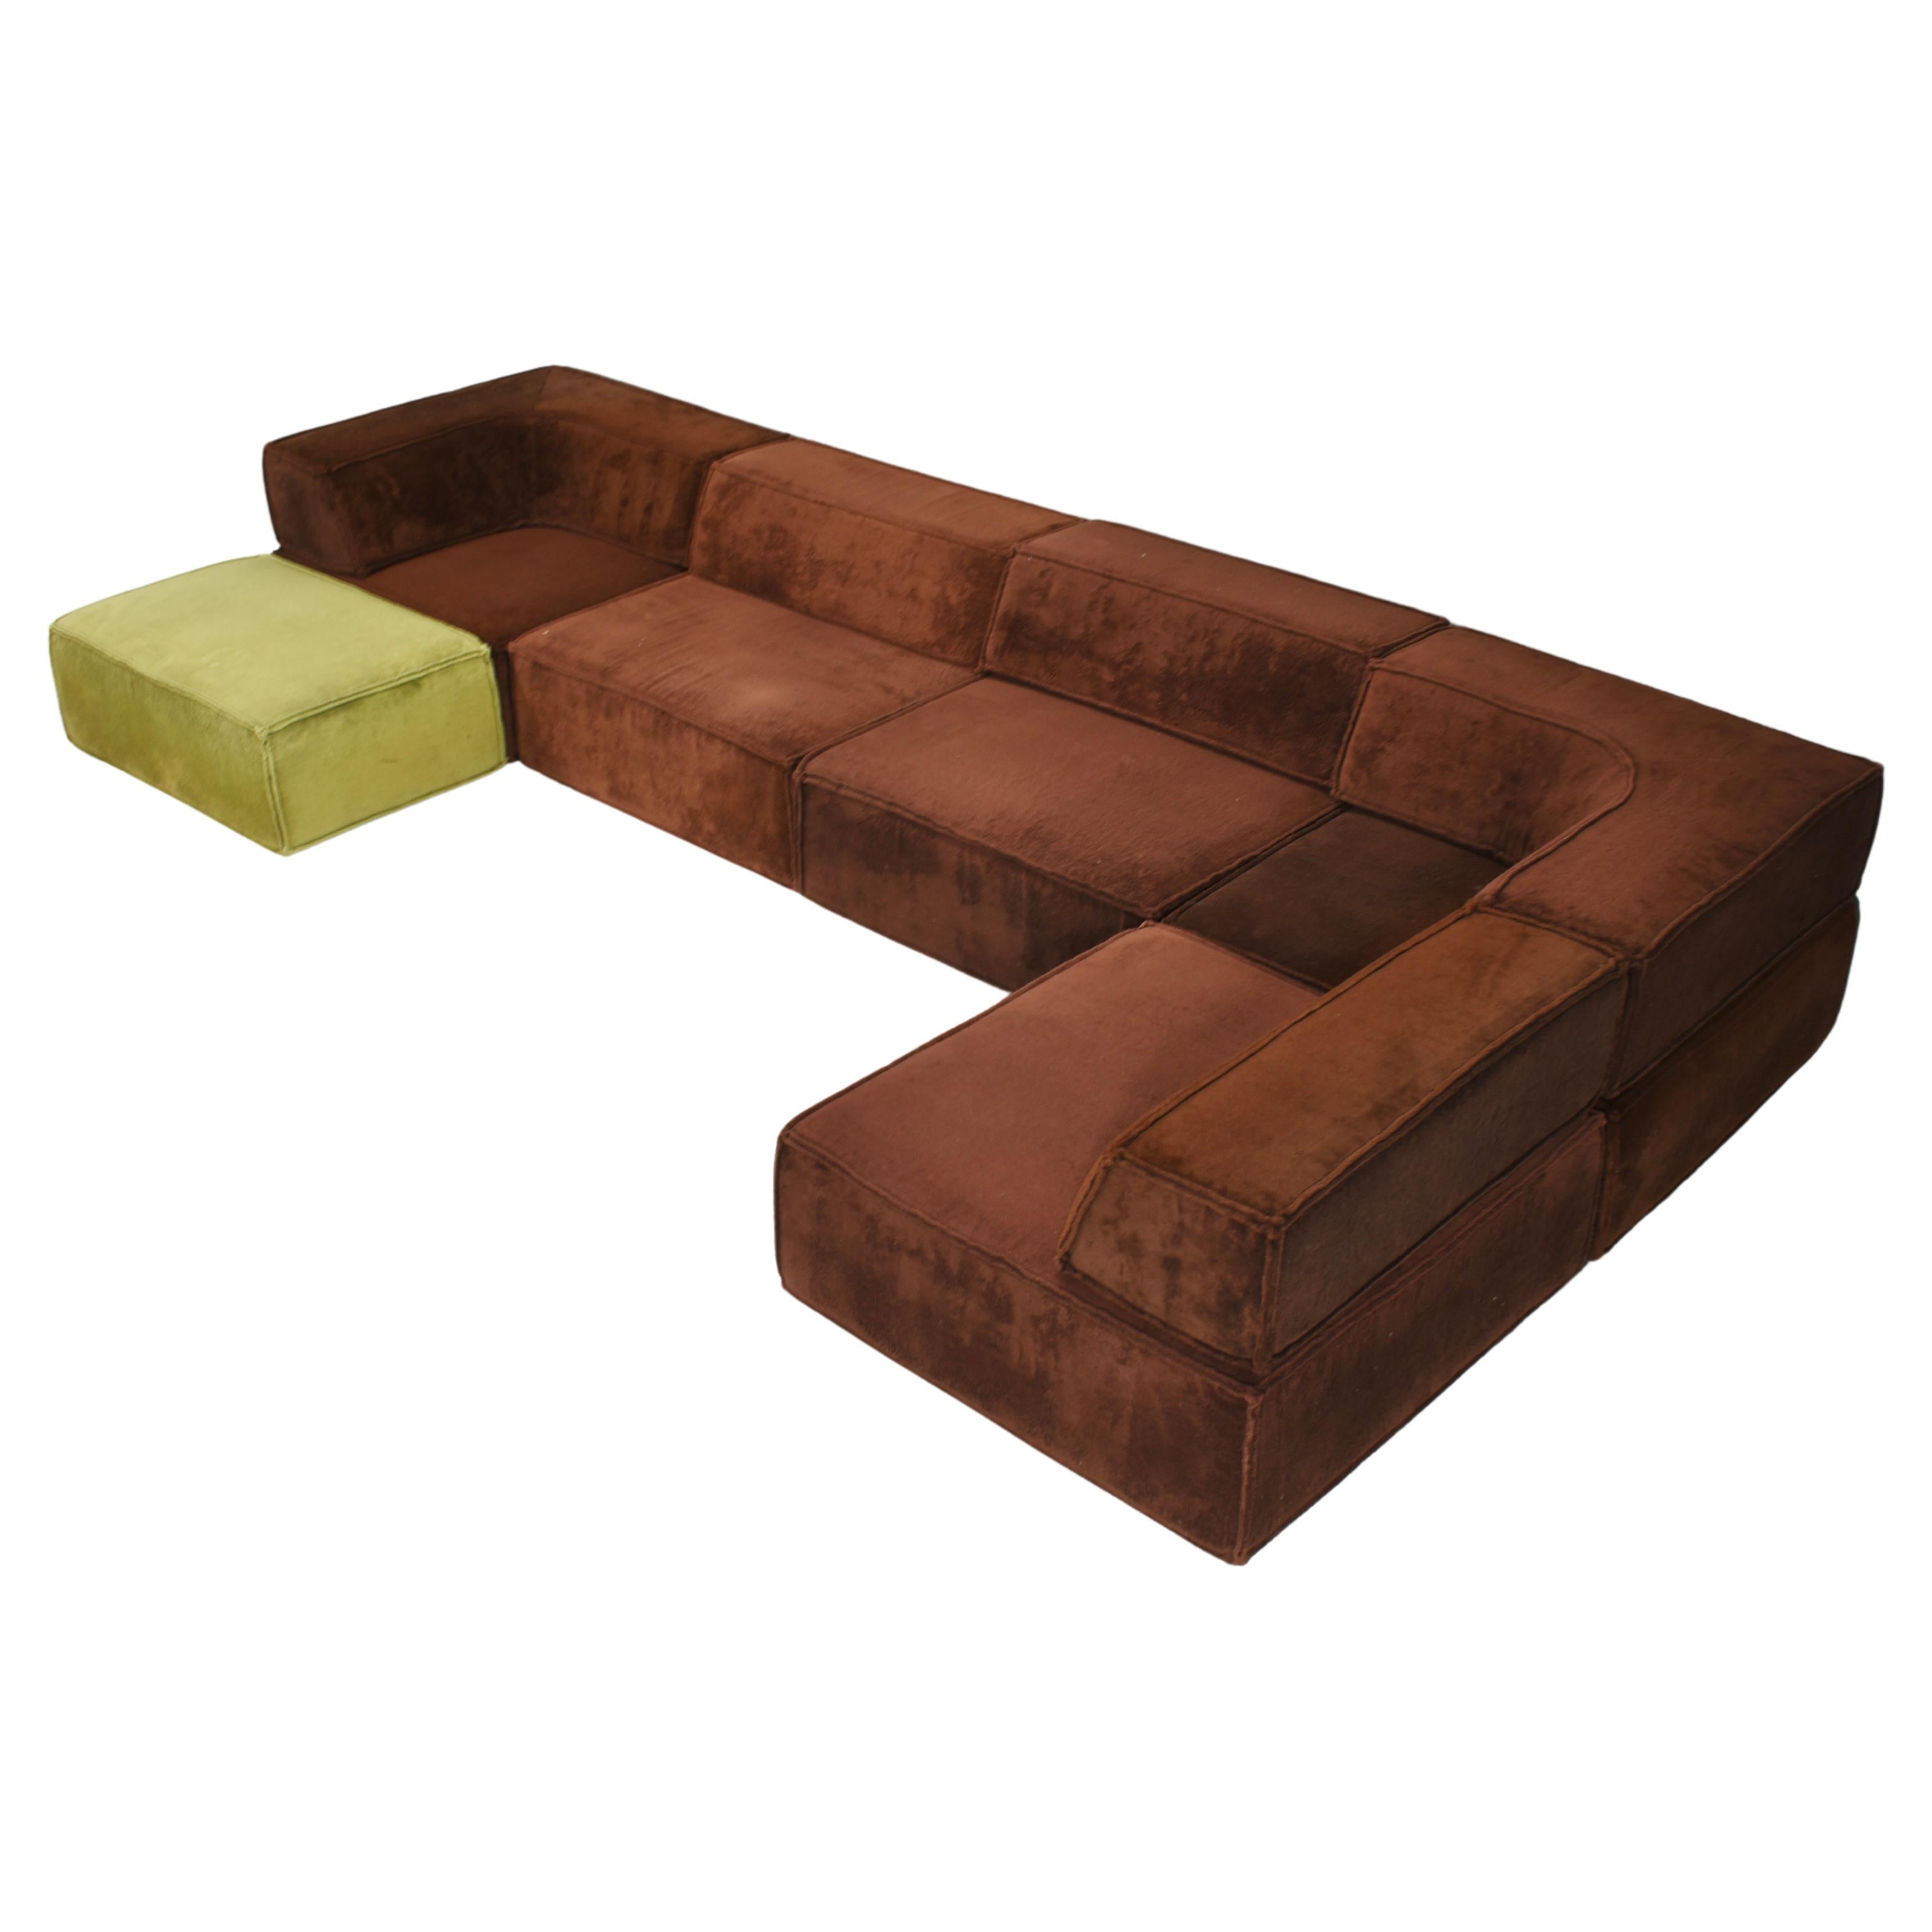 COR Trio Sectional Sofa for REUPHOLSTERING, Germany / Switzerland, 1972